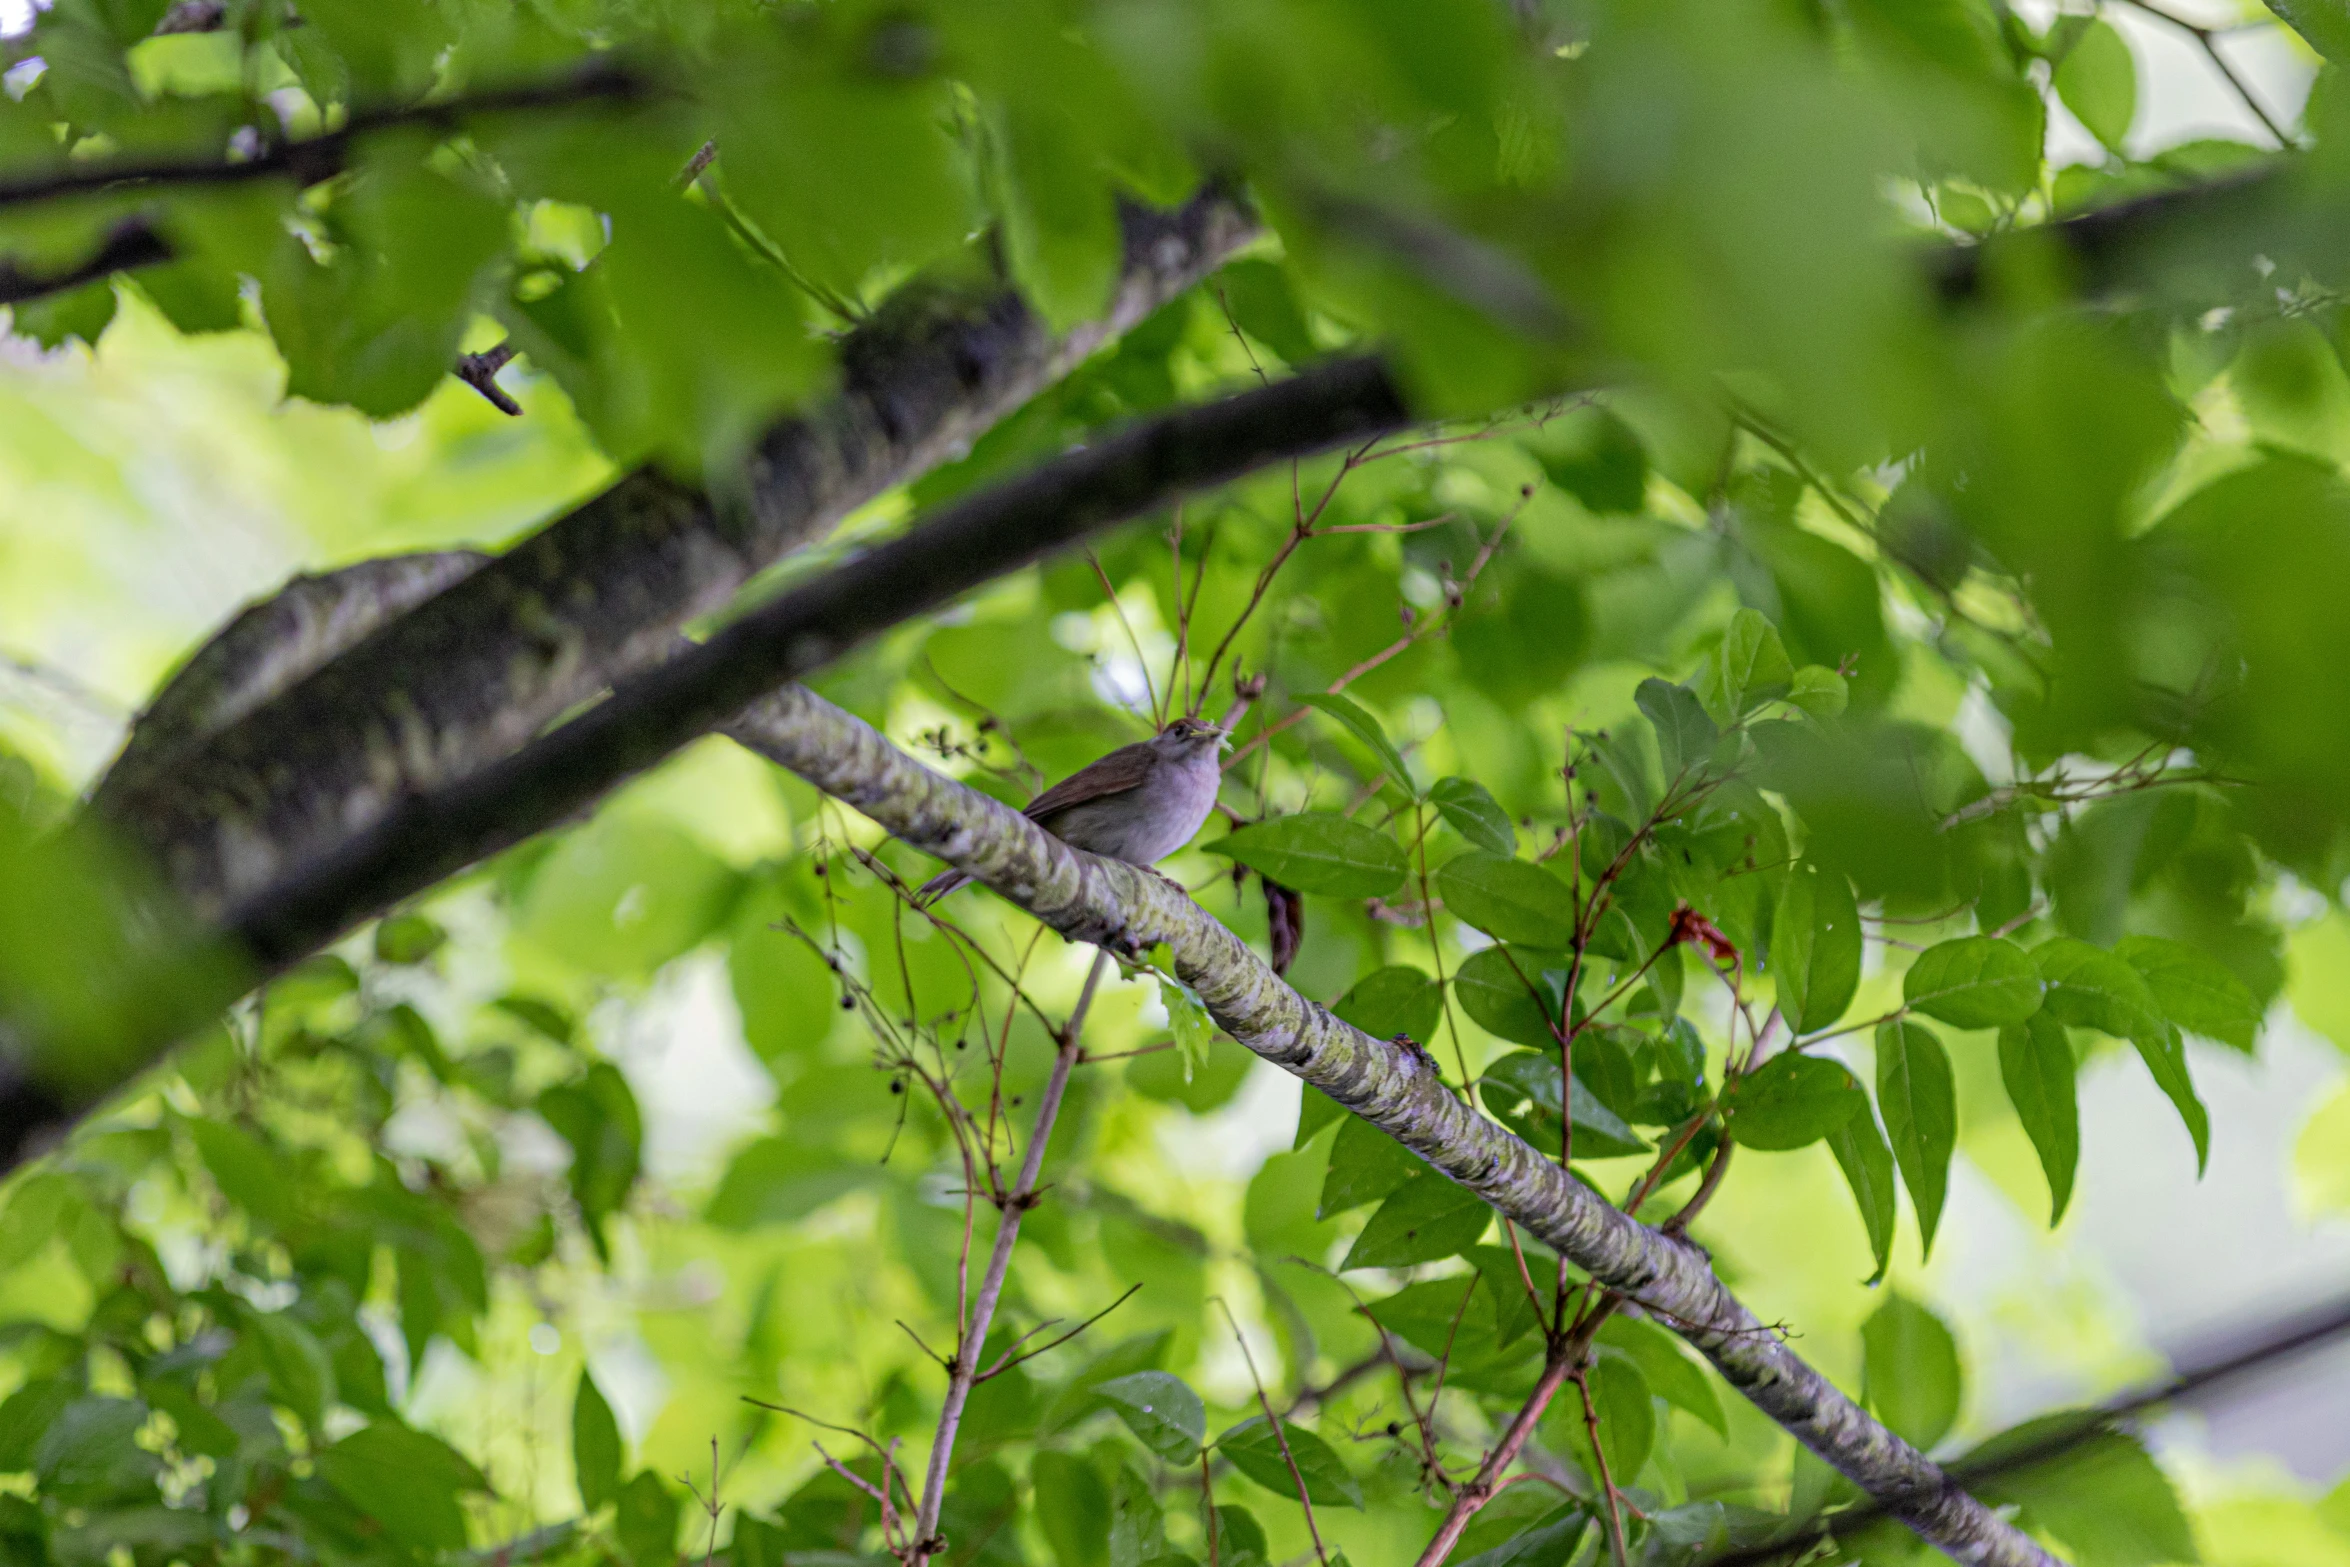 a small bird perched in a tree near some leaves